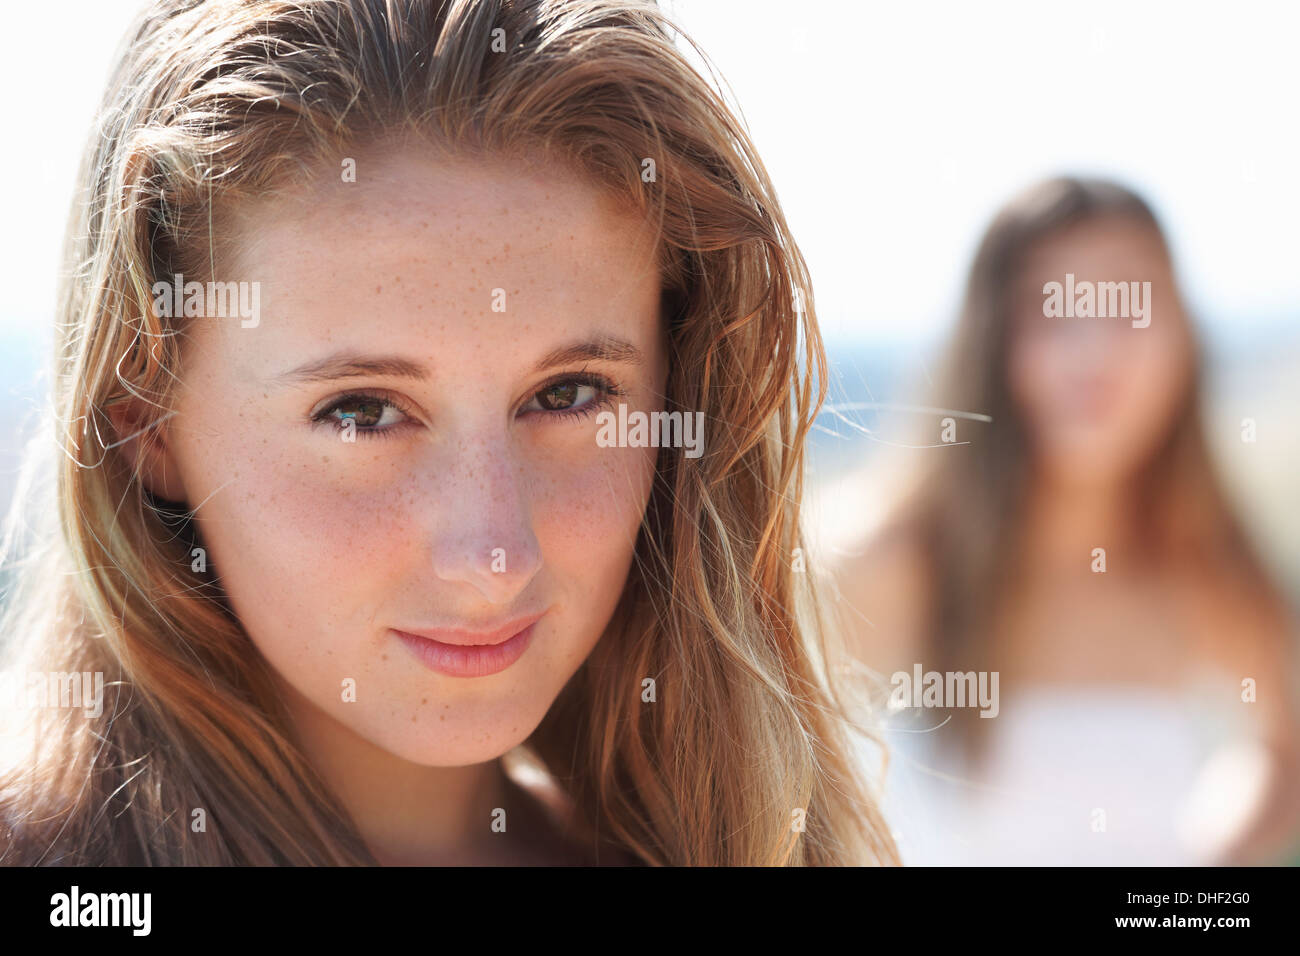 Portrait of teenage girl, focus on foreground Banque D'Images